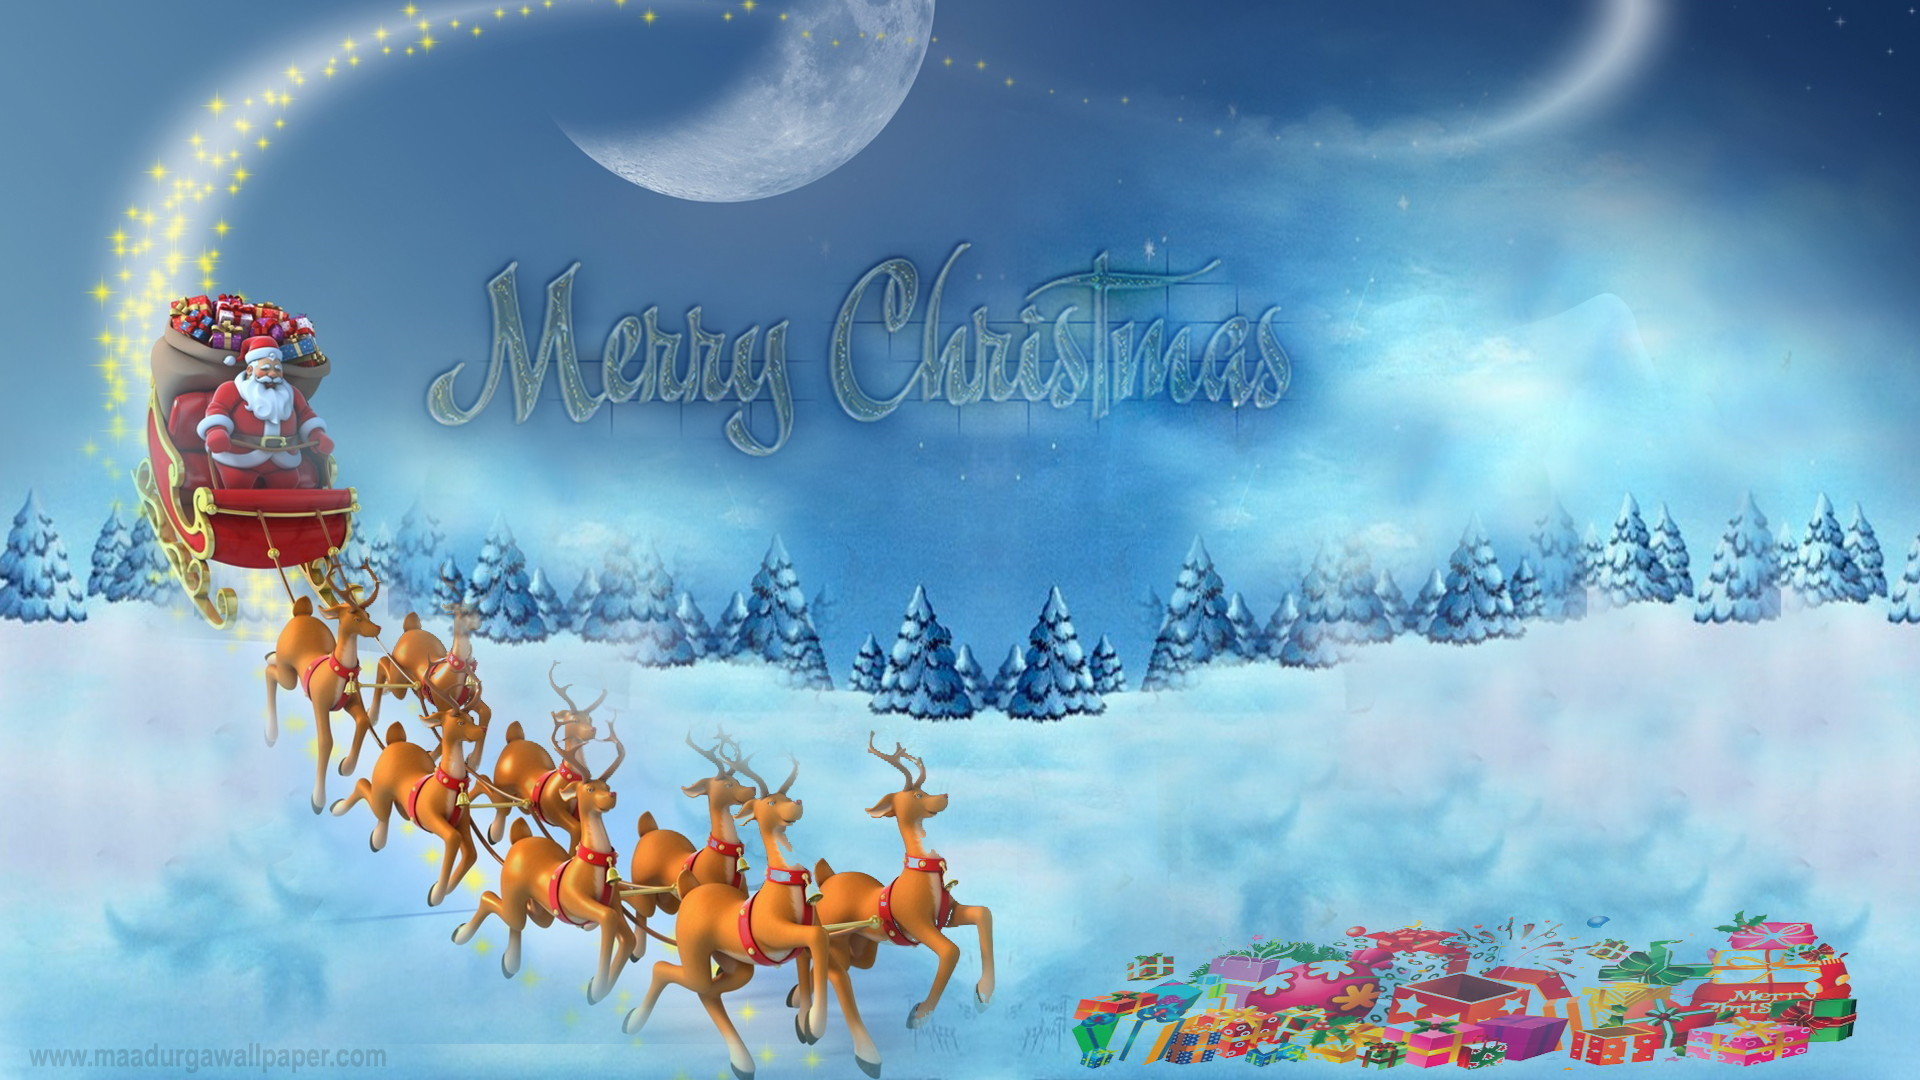 1920x1080 Christmas wallpapers free, beautiful pictures & hd images download free for  tablet, laptop &